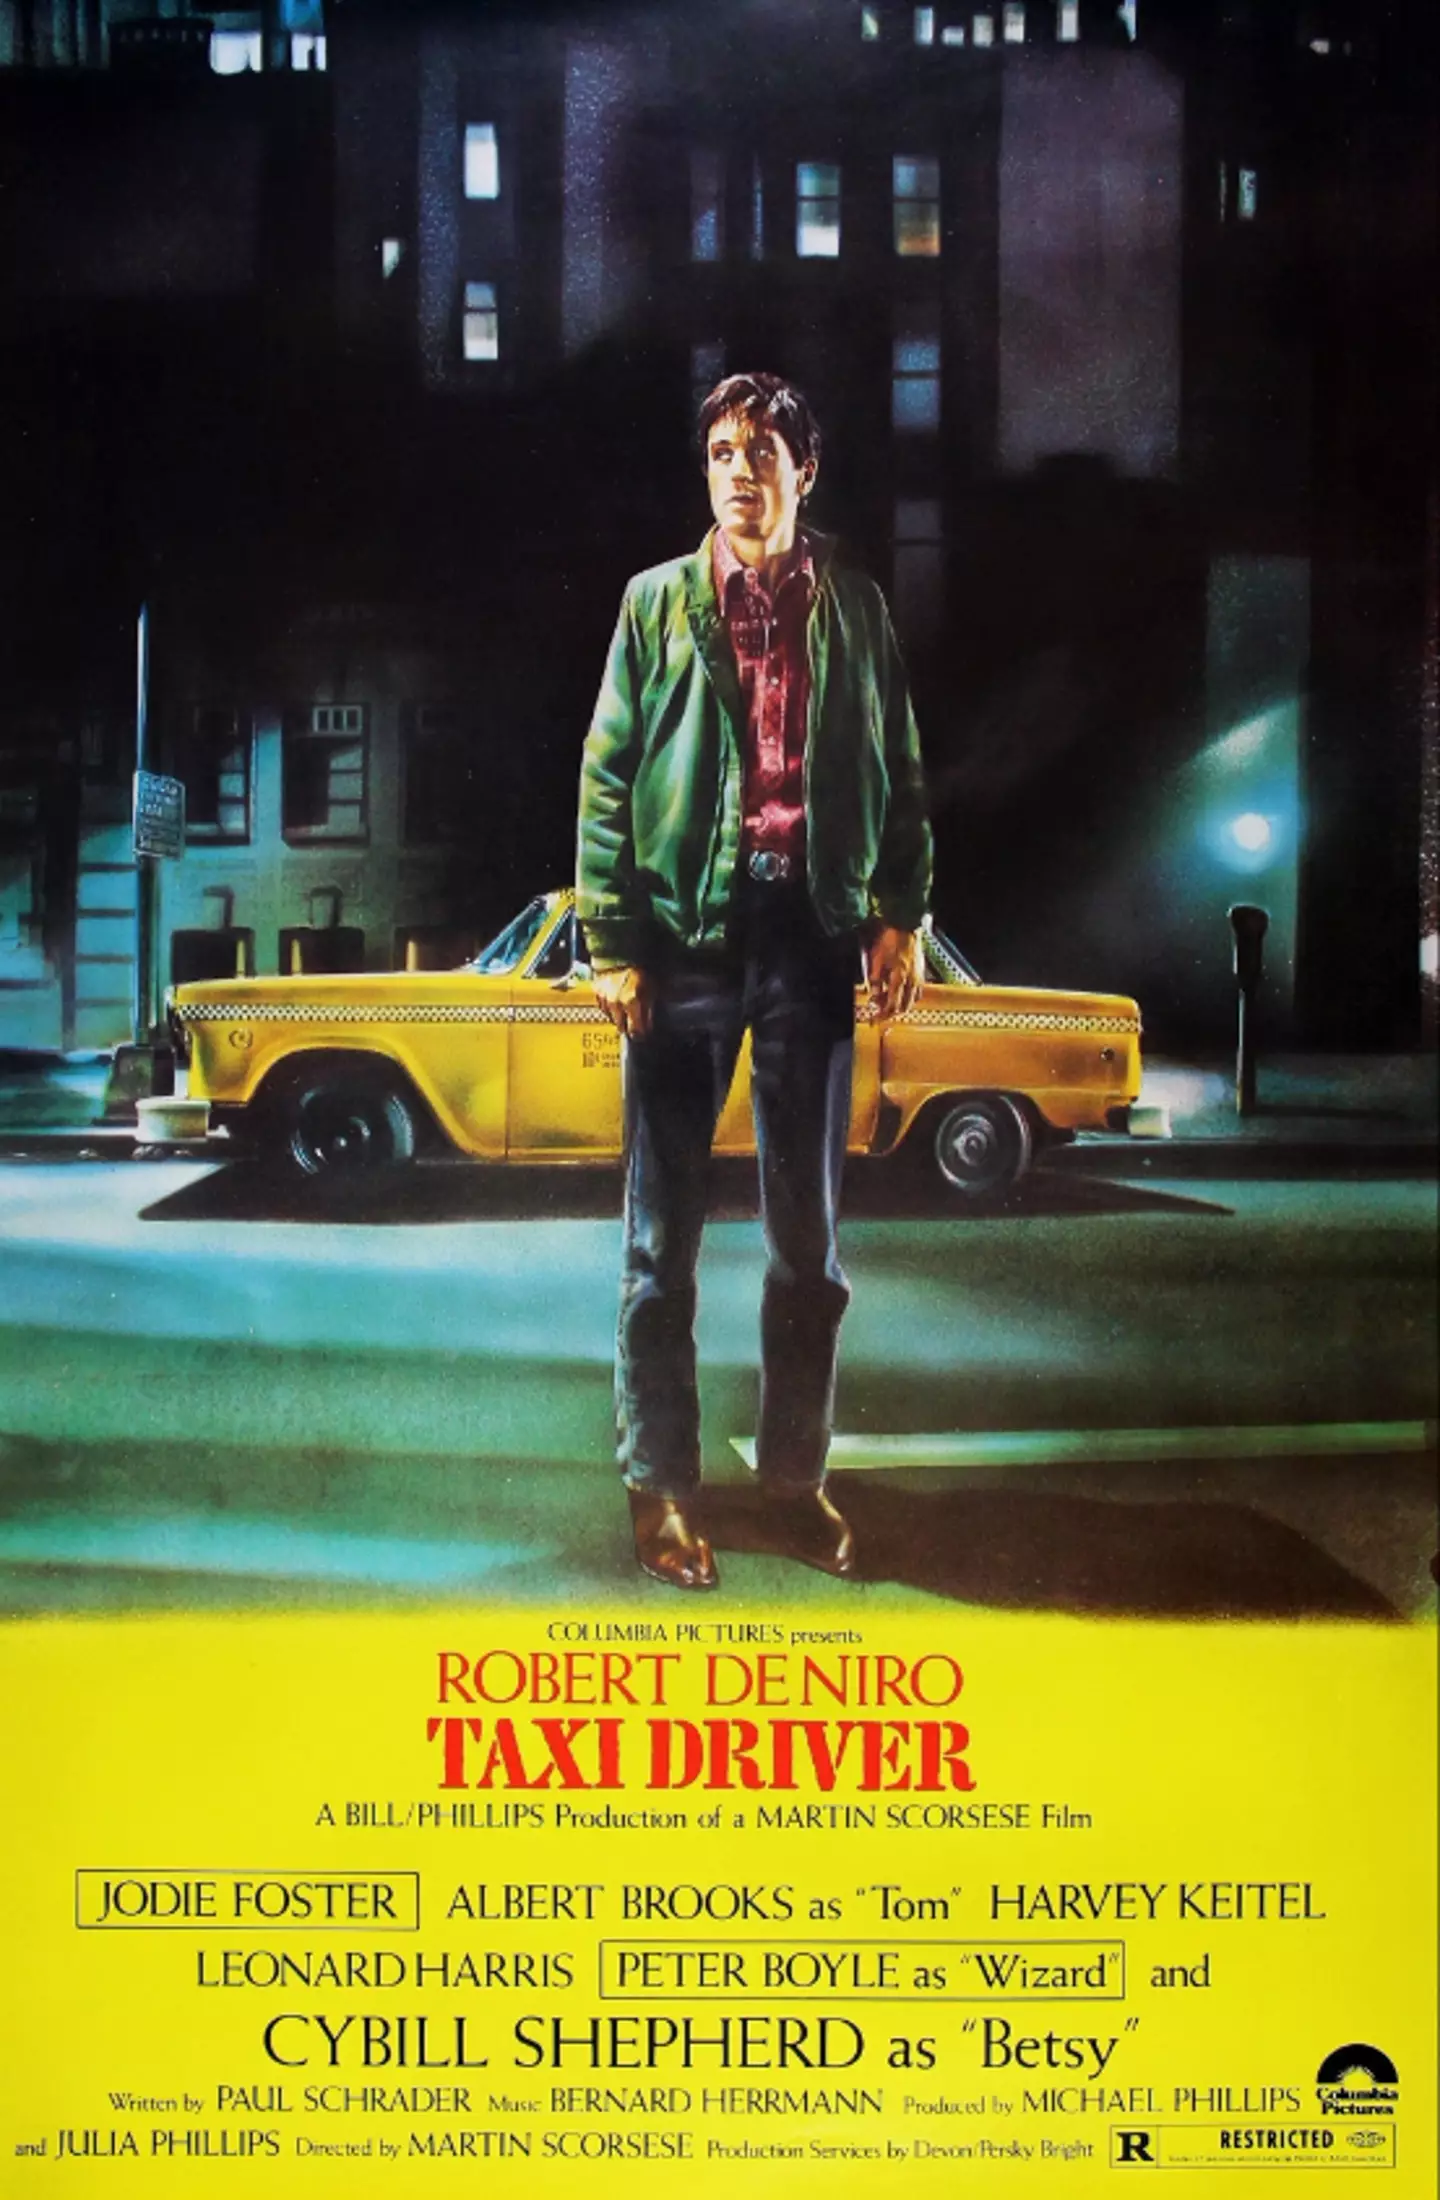 Taxi Driver is widely regarded as one of the best films ever made.